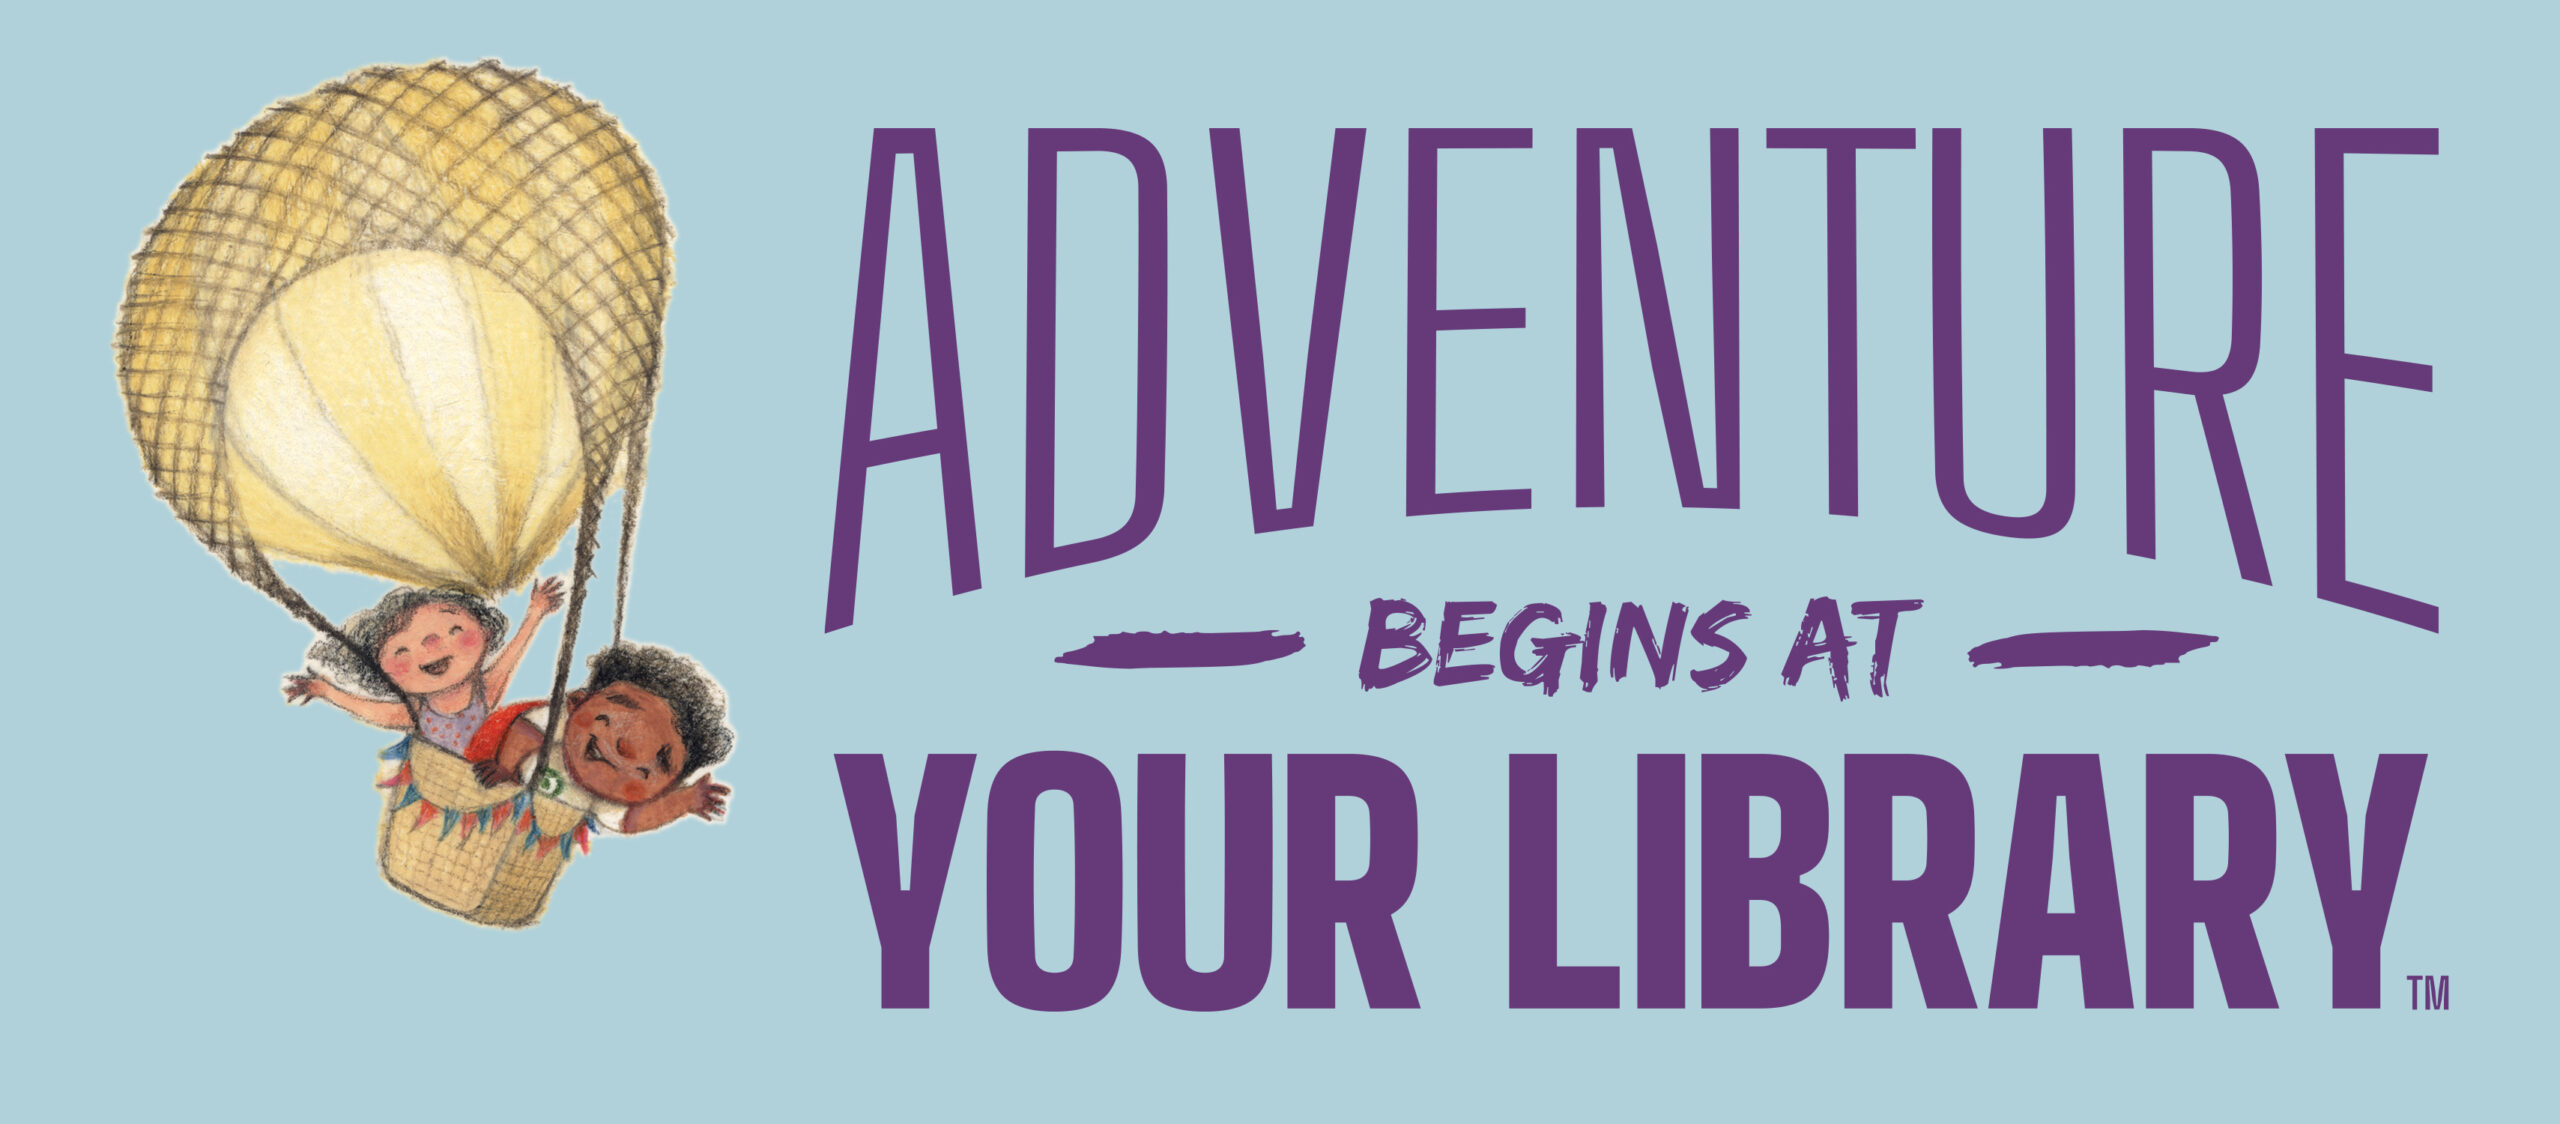 Adventure Begins At Your Library. Clip art images of kids in a hot air balloon